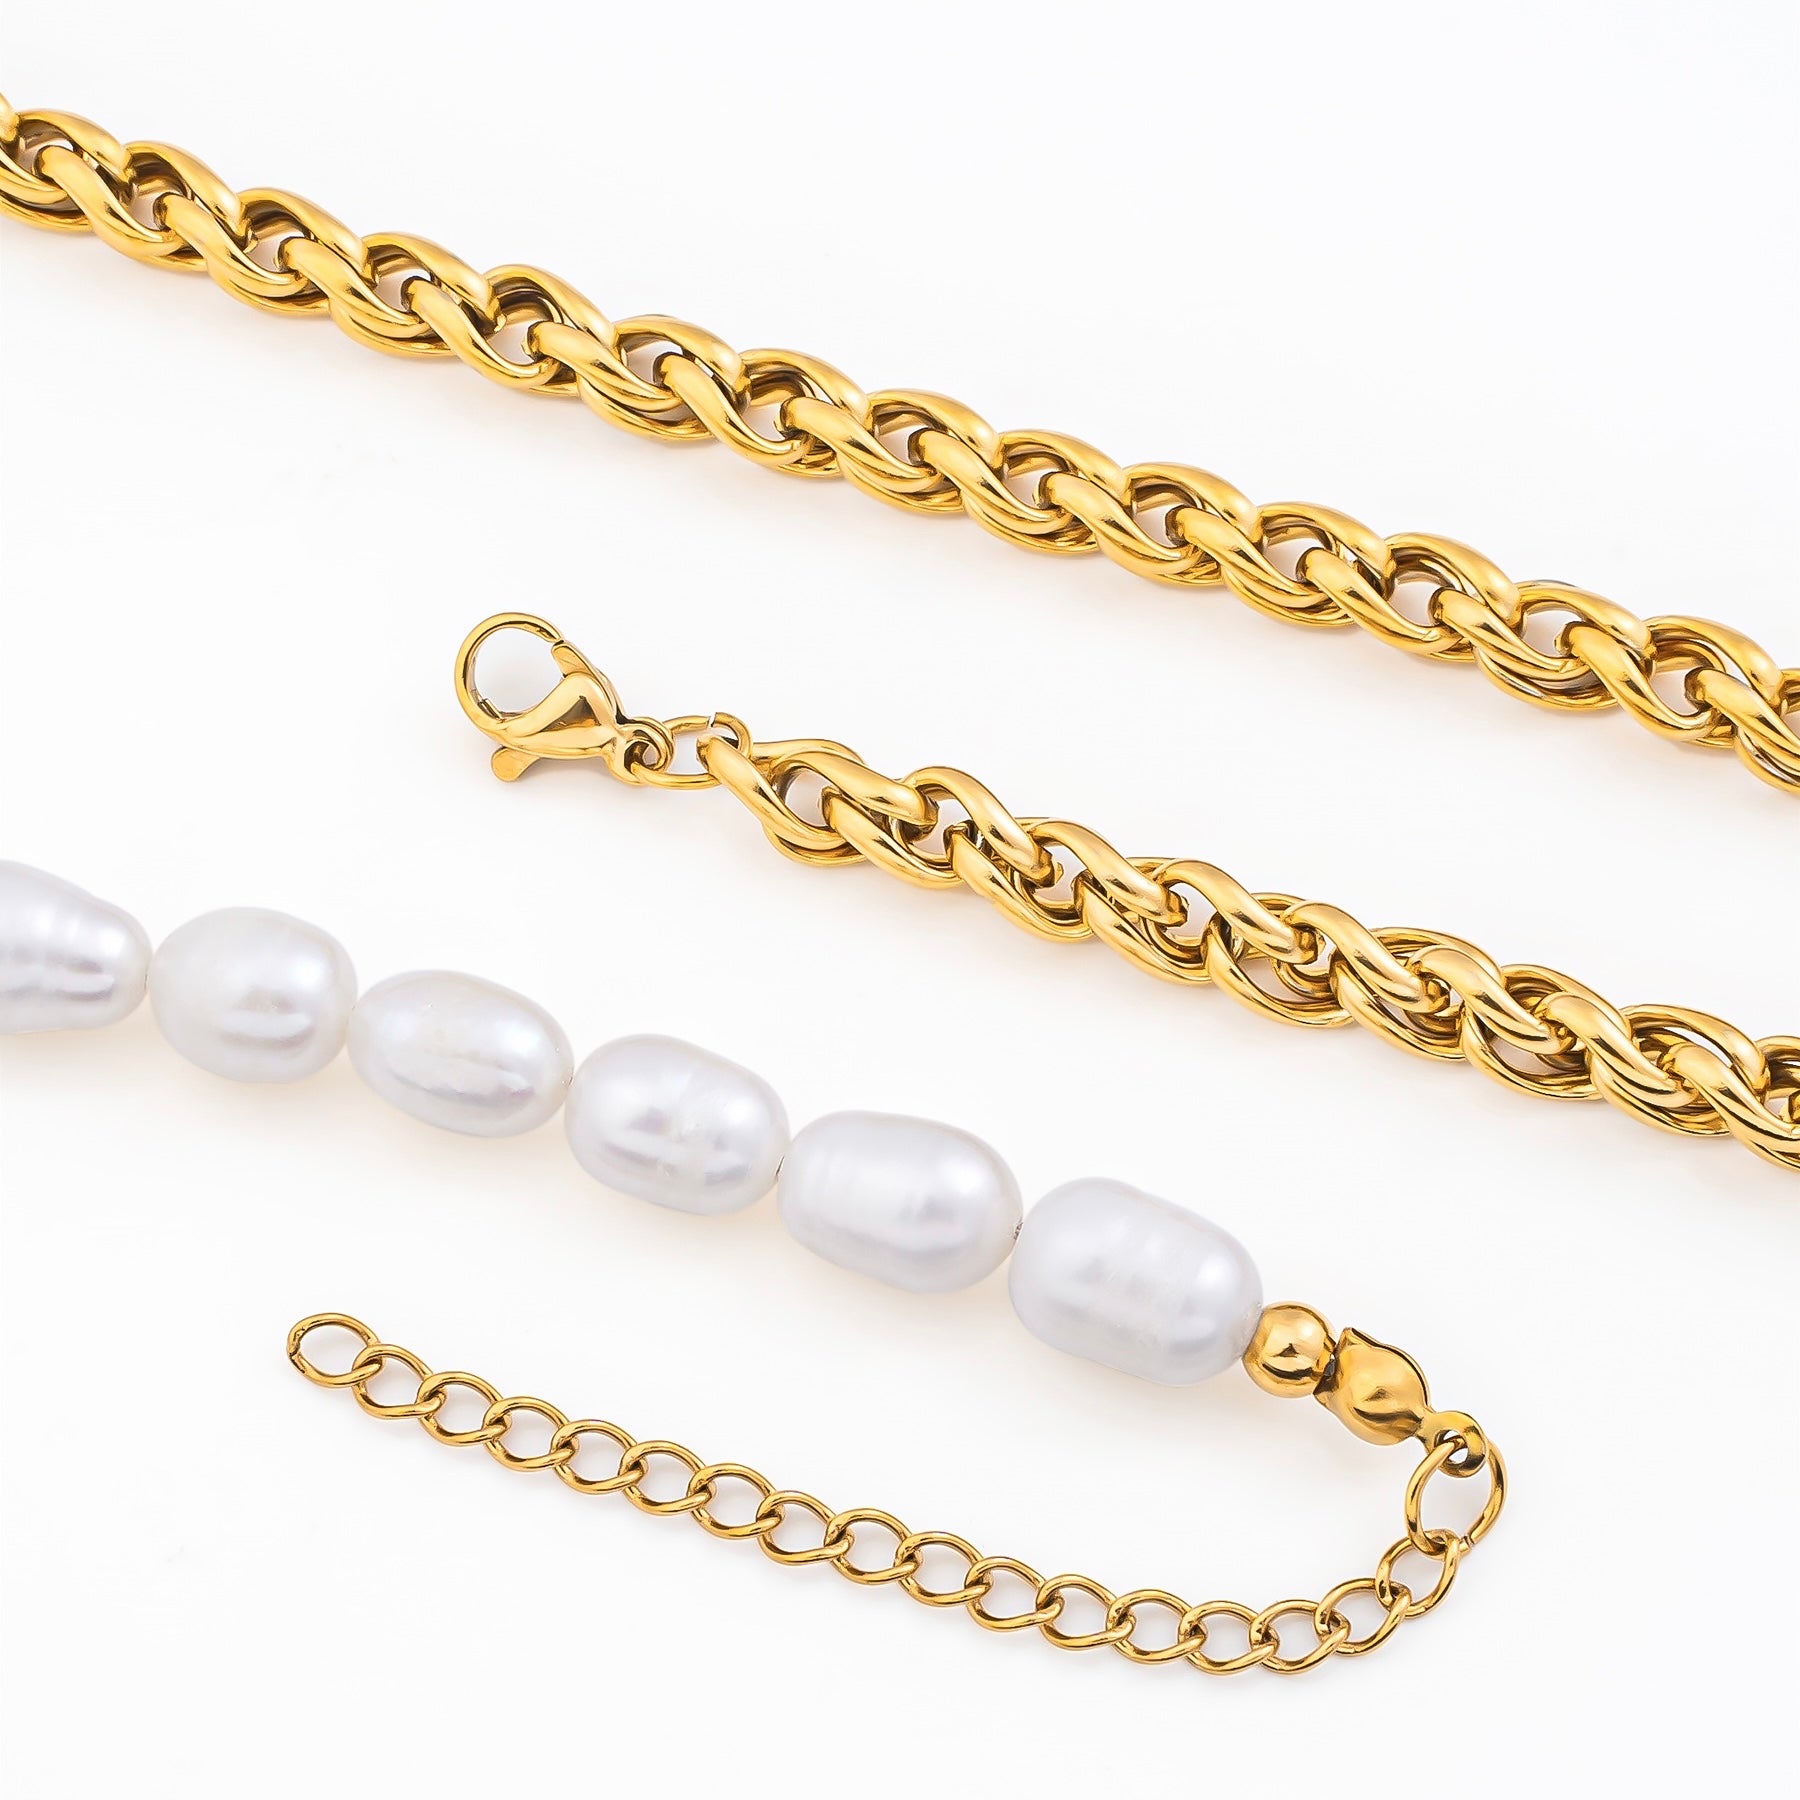 Cuban Pearl necklace